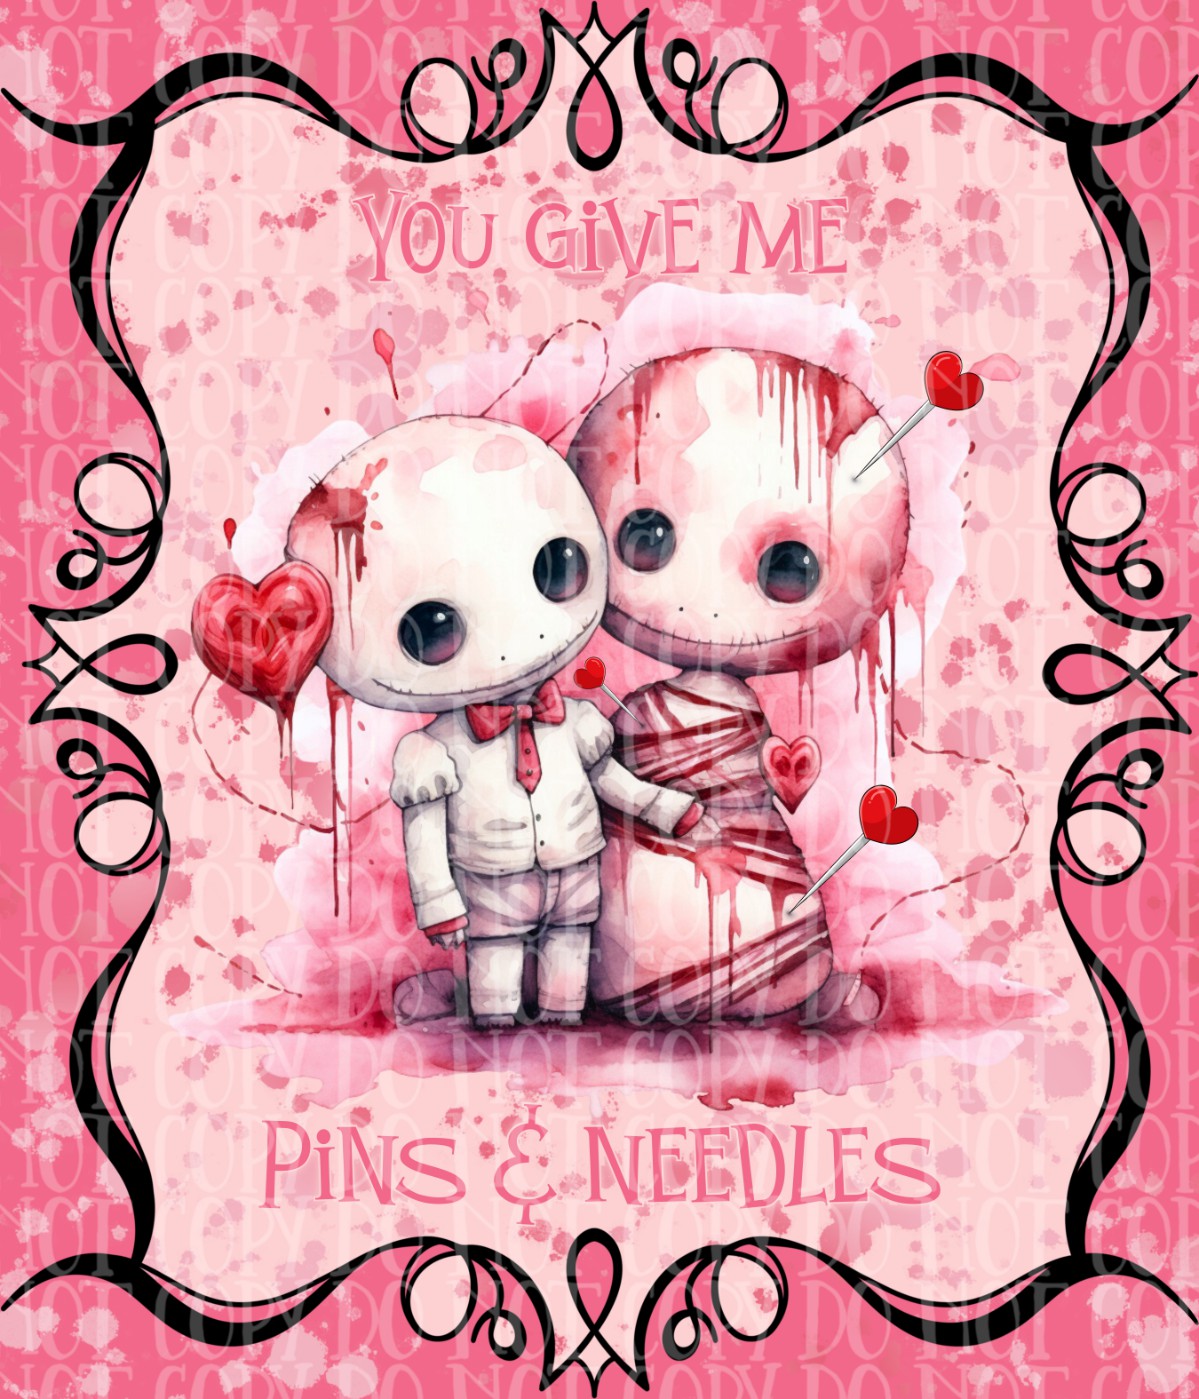 VooDoo Doll You Give Me Pins & Needles Card